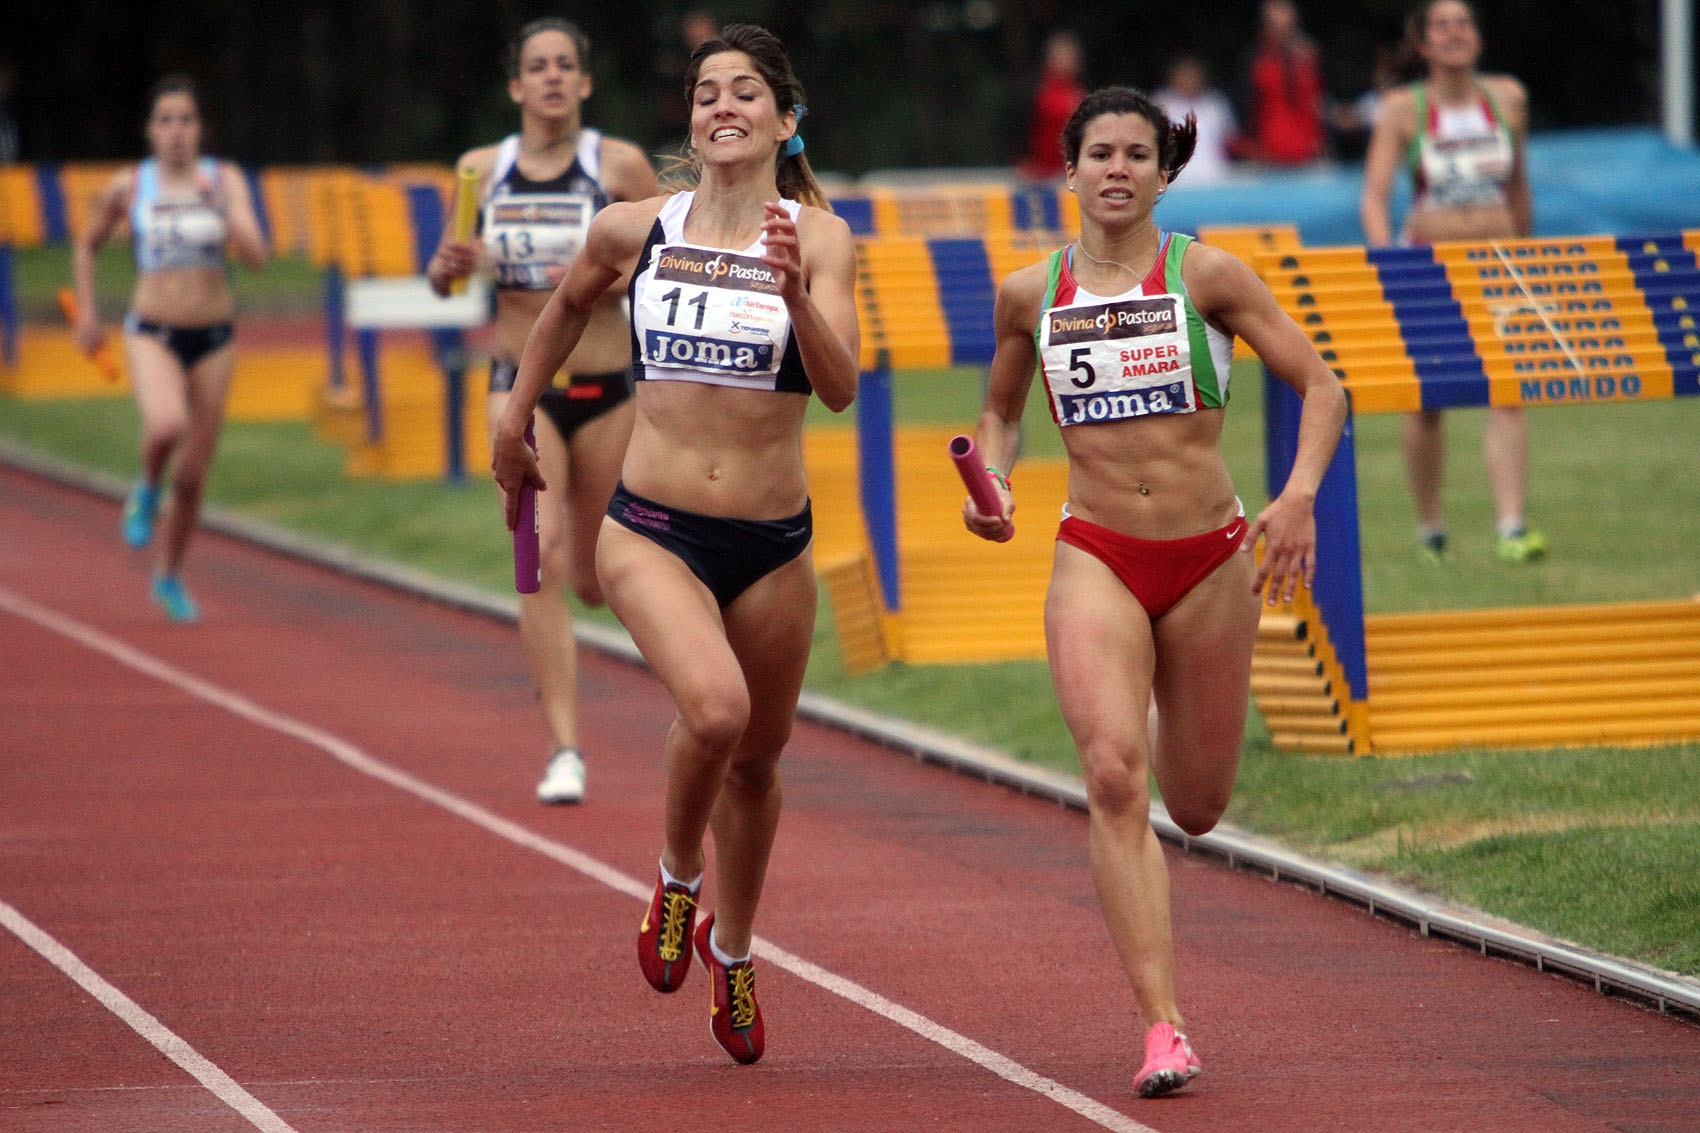 ropa atletismo mujer